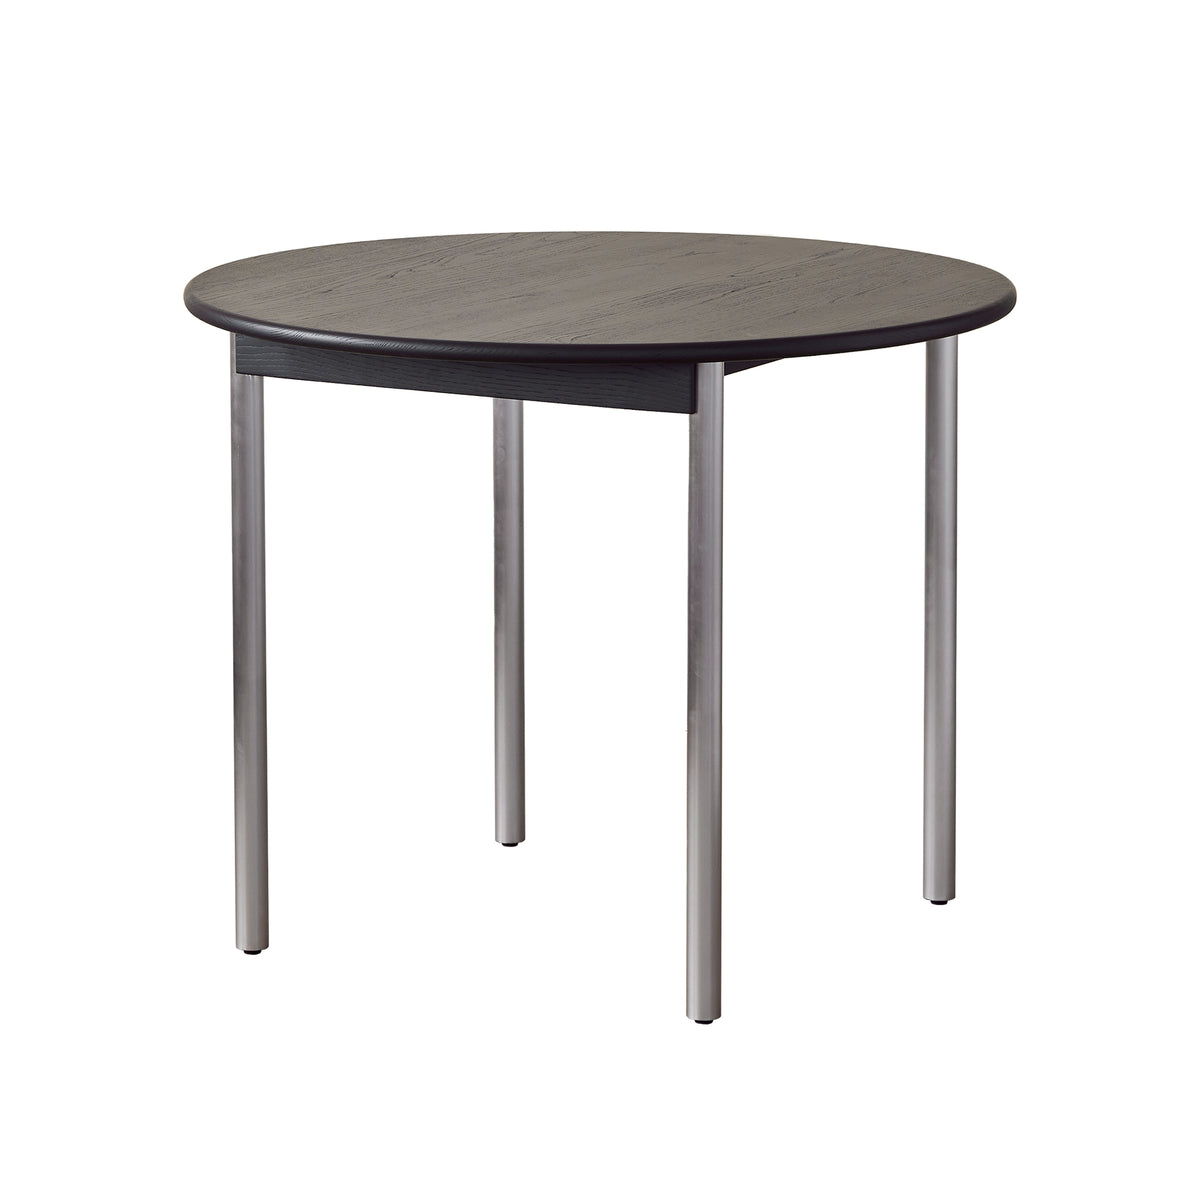 Less Table - Round